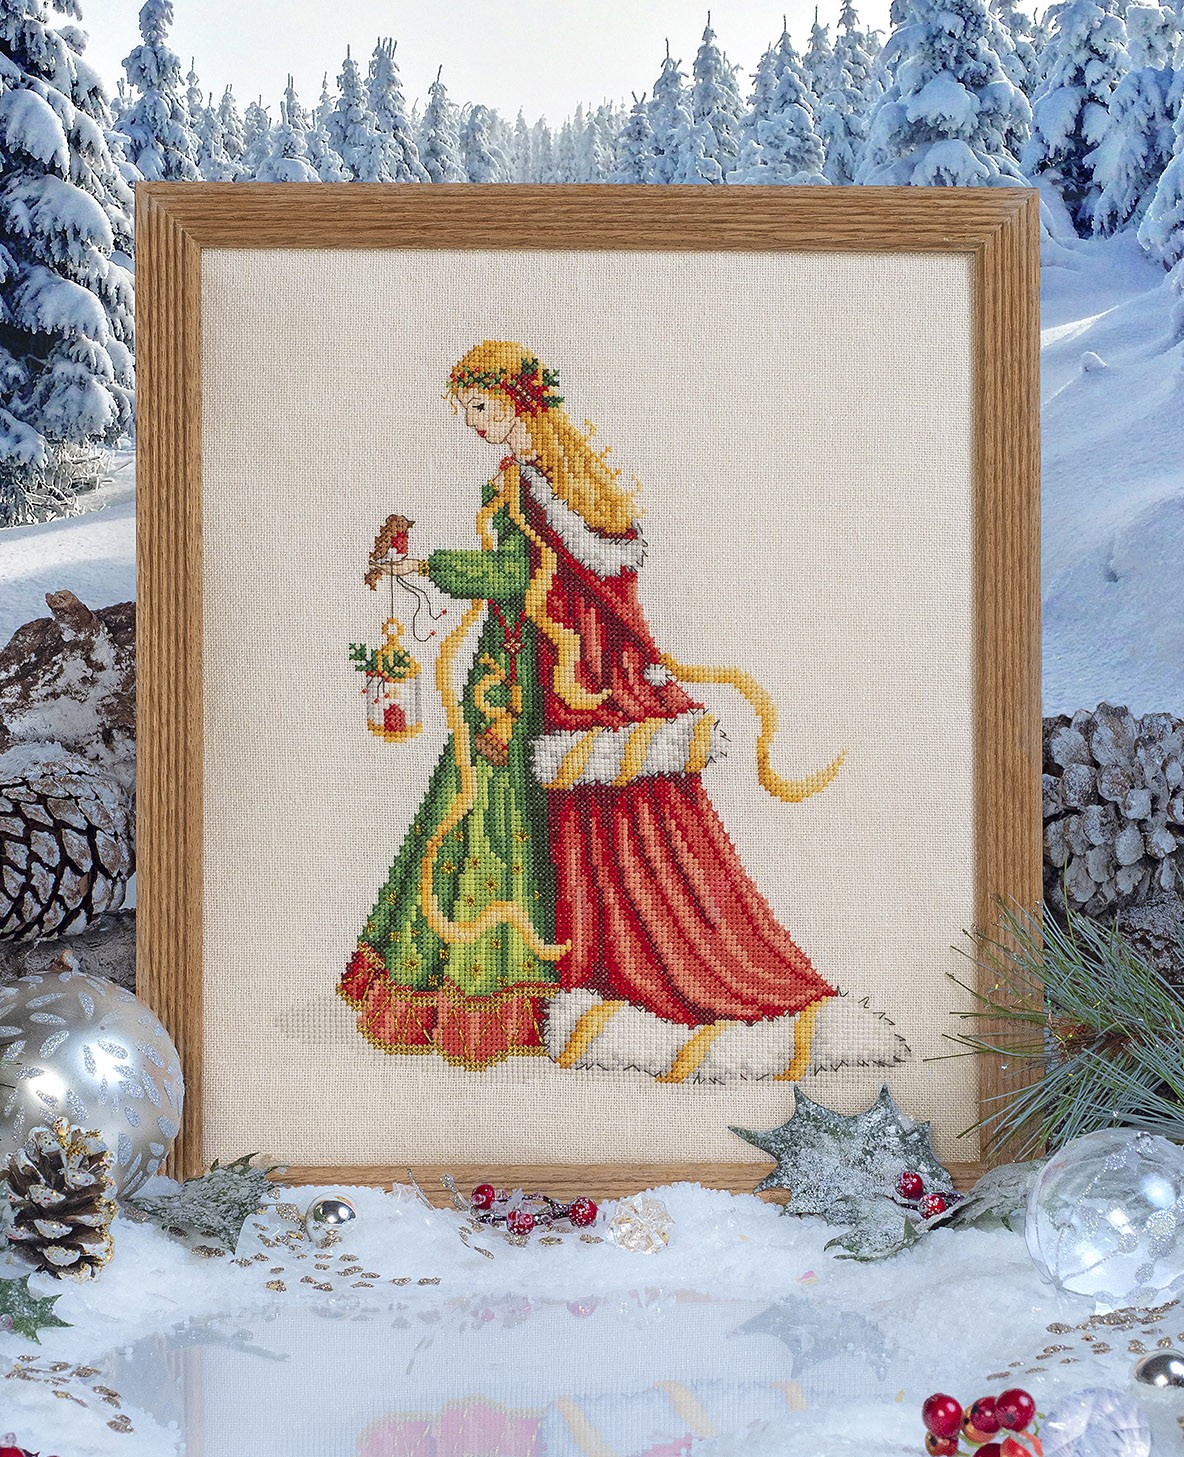 Cross Stitcher Project Pack - issue 390 - Spirit of Christmas - Victorian Lady